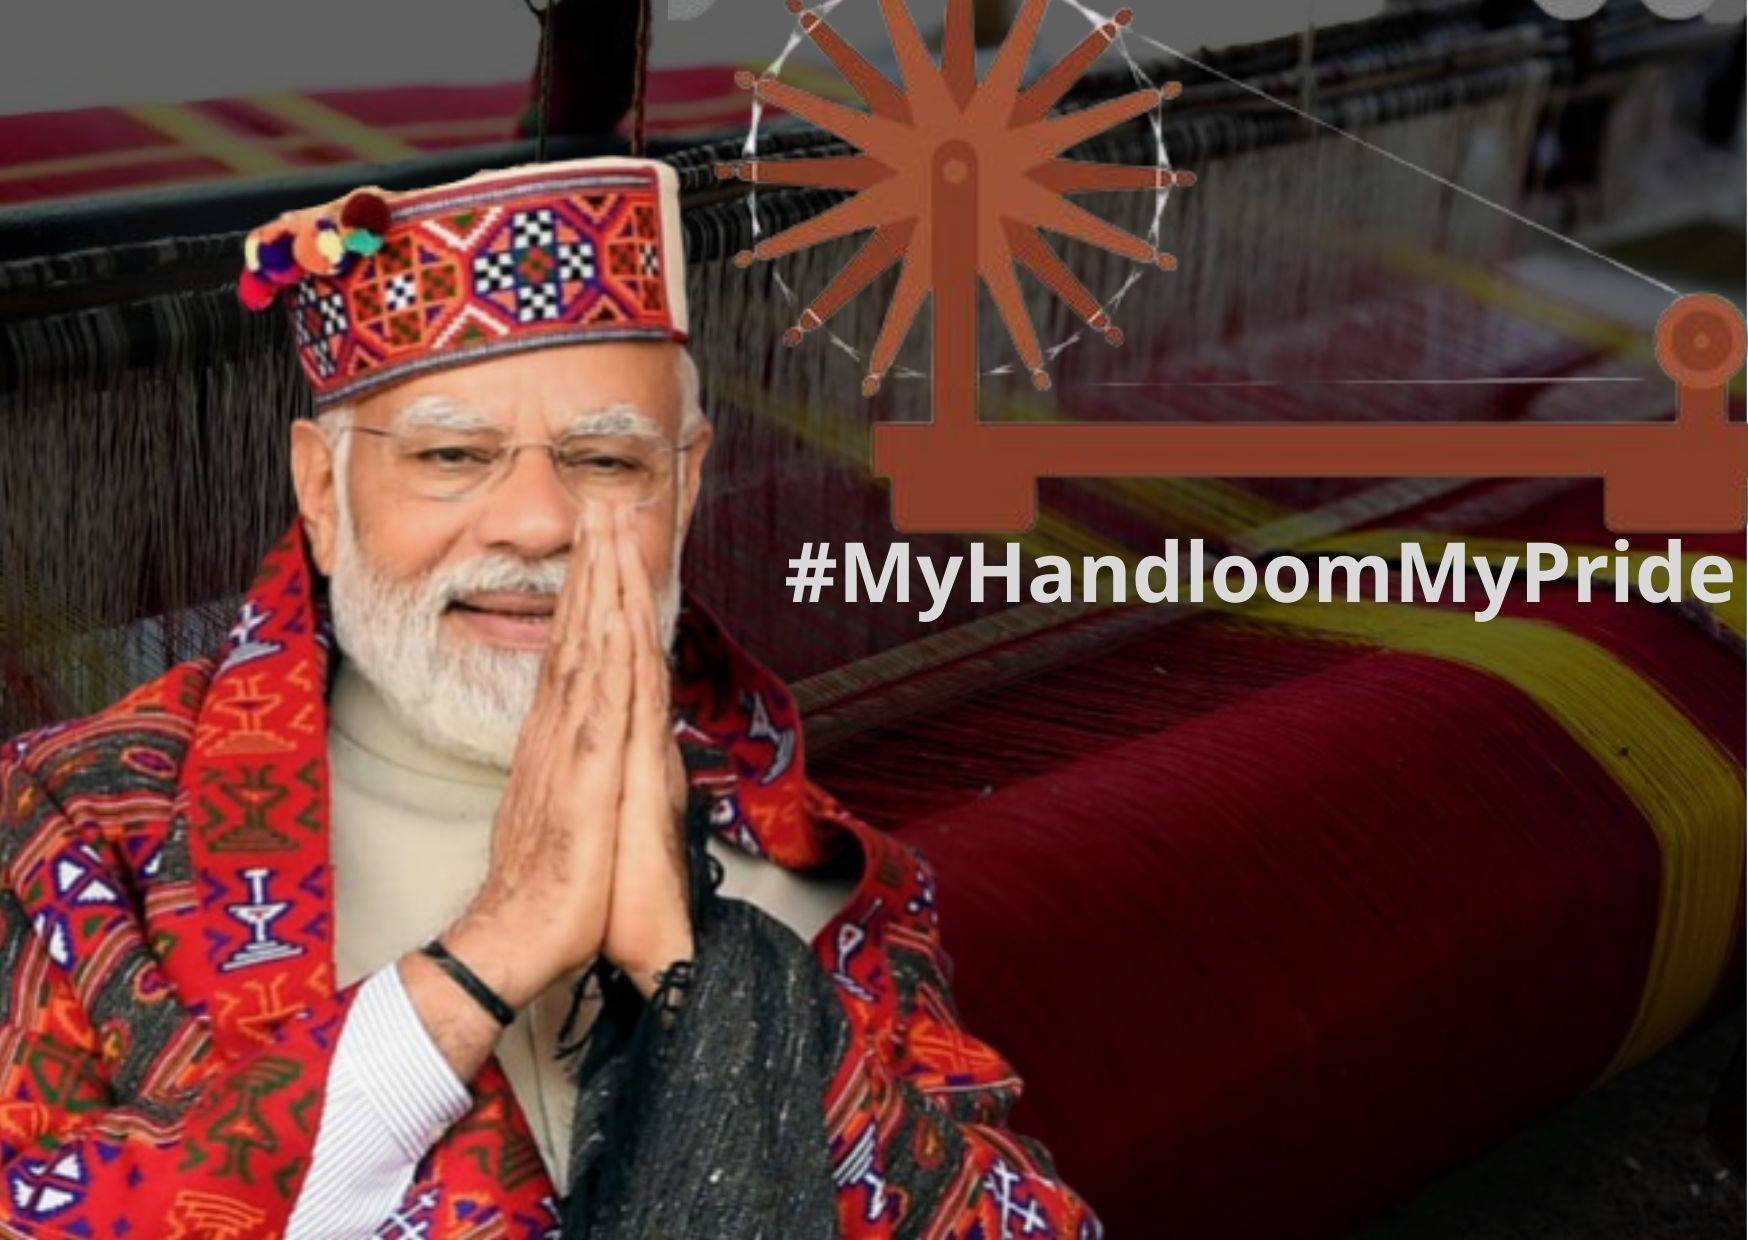 PM urges youngsters associated with StartUps to take part in Handloom Startup Grand Challenge